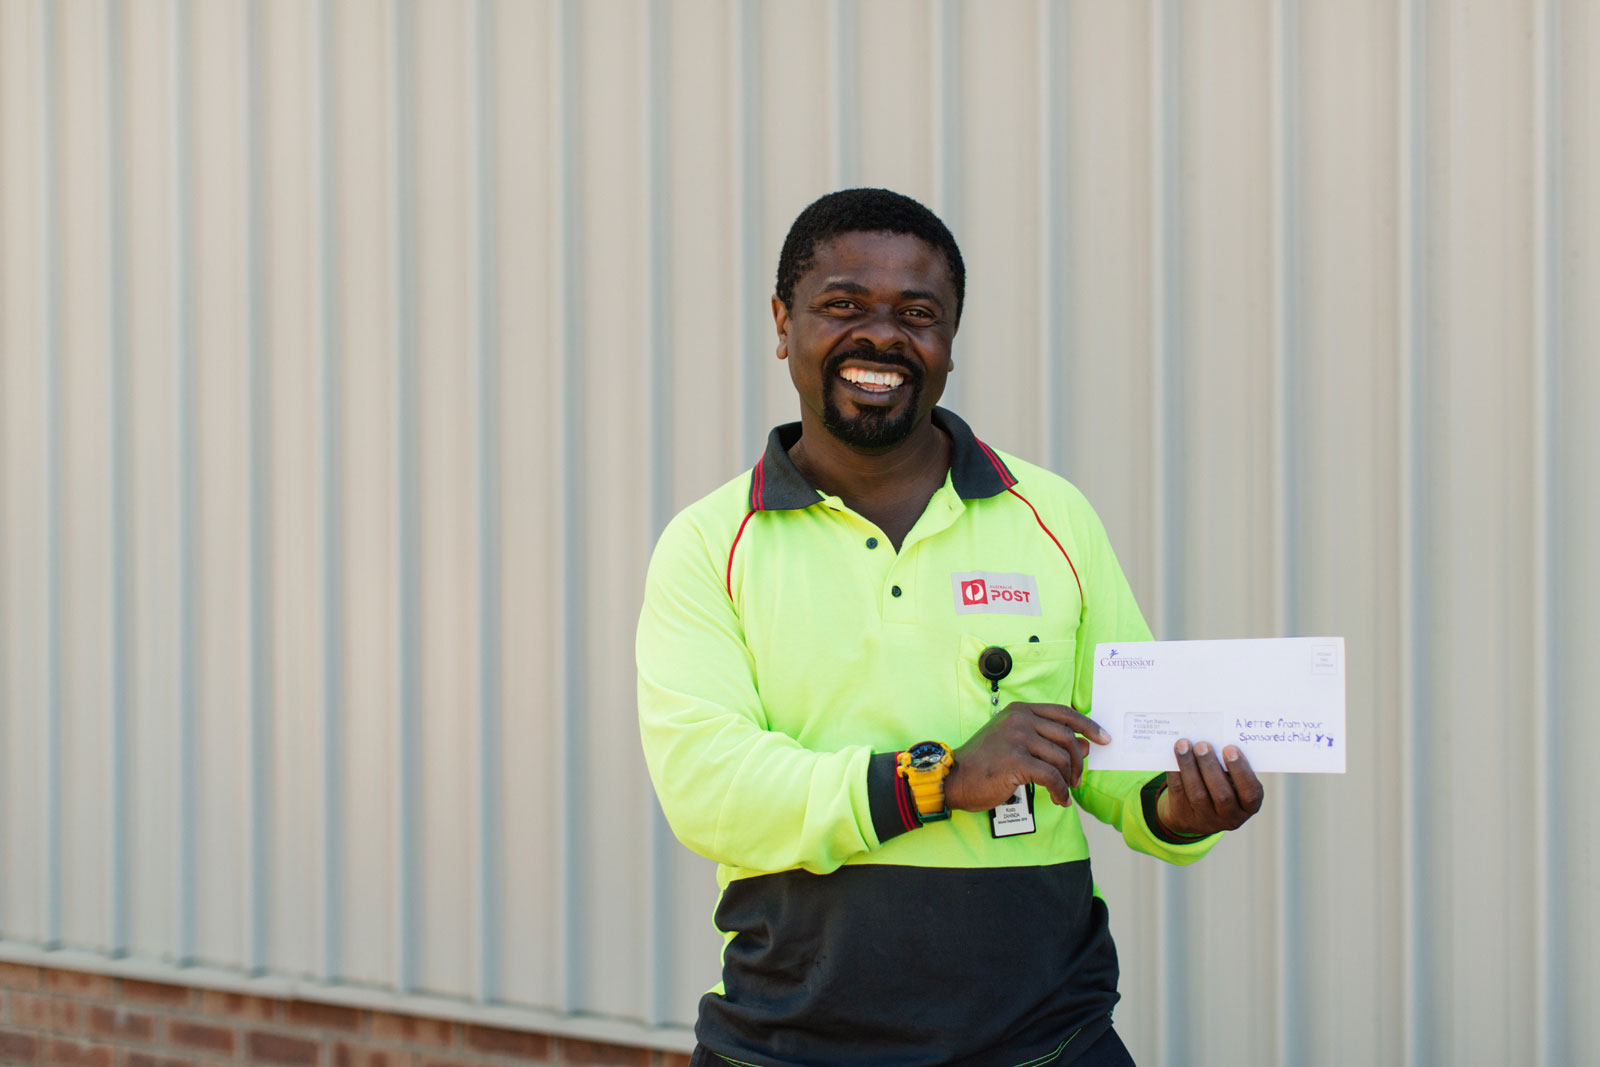 How One Remarkable Postman Encourages Sponsors on His Route